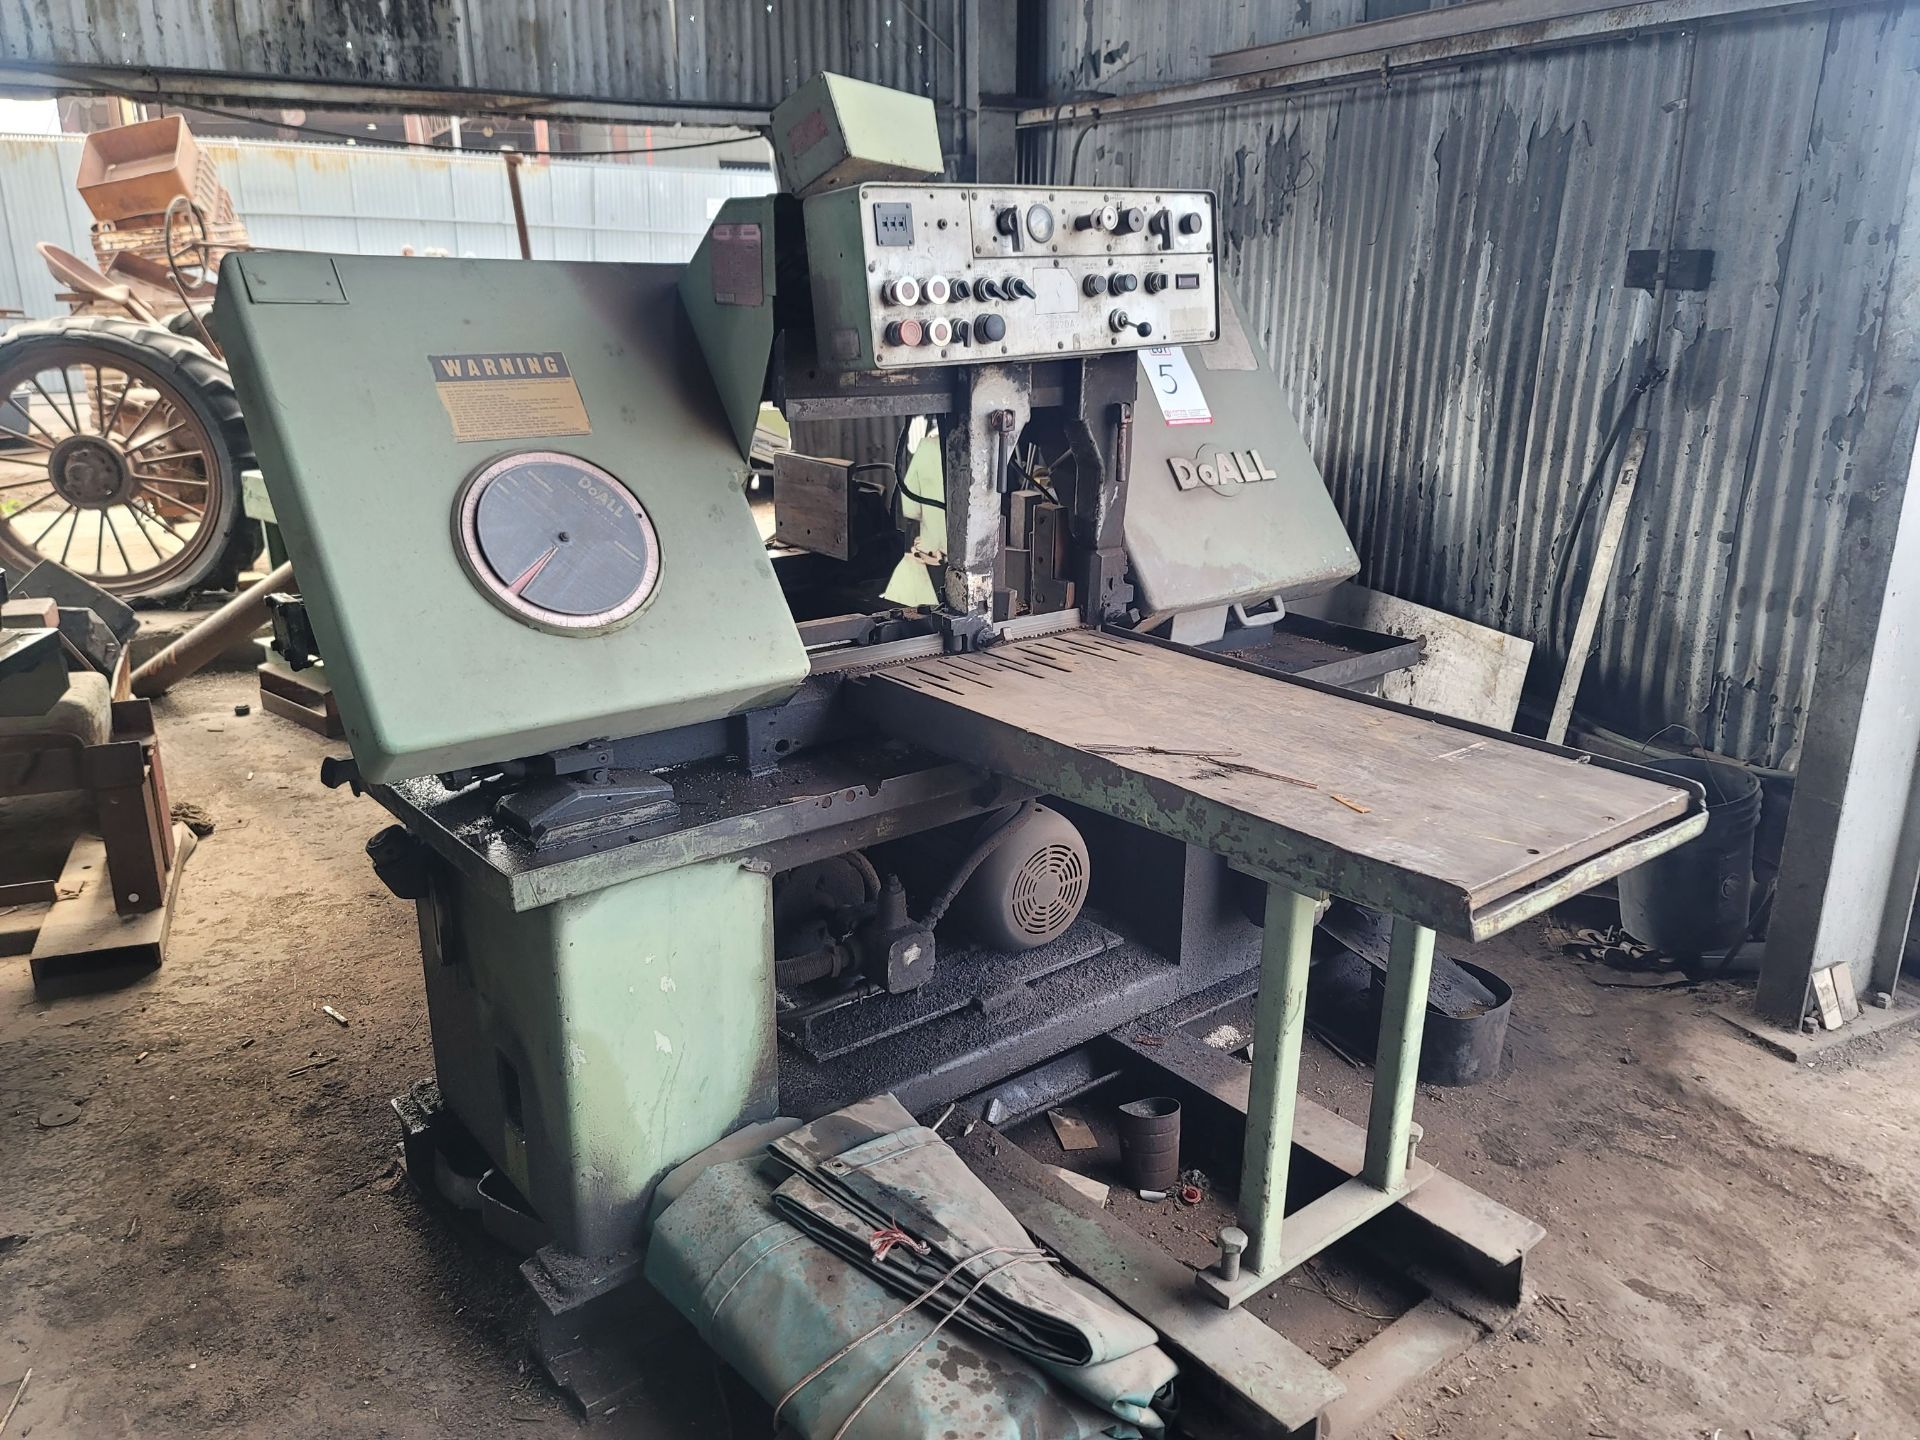 DOALL C-1220A HORIZONTAL BAND SAW, AUTOMATIC, 12" X 20" CUTTING CAPACITY, S/N 402-80110 - Image 2 of 5